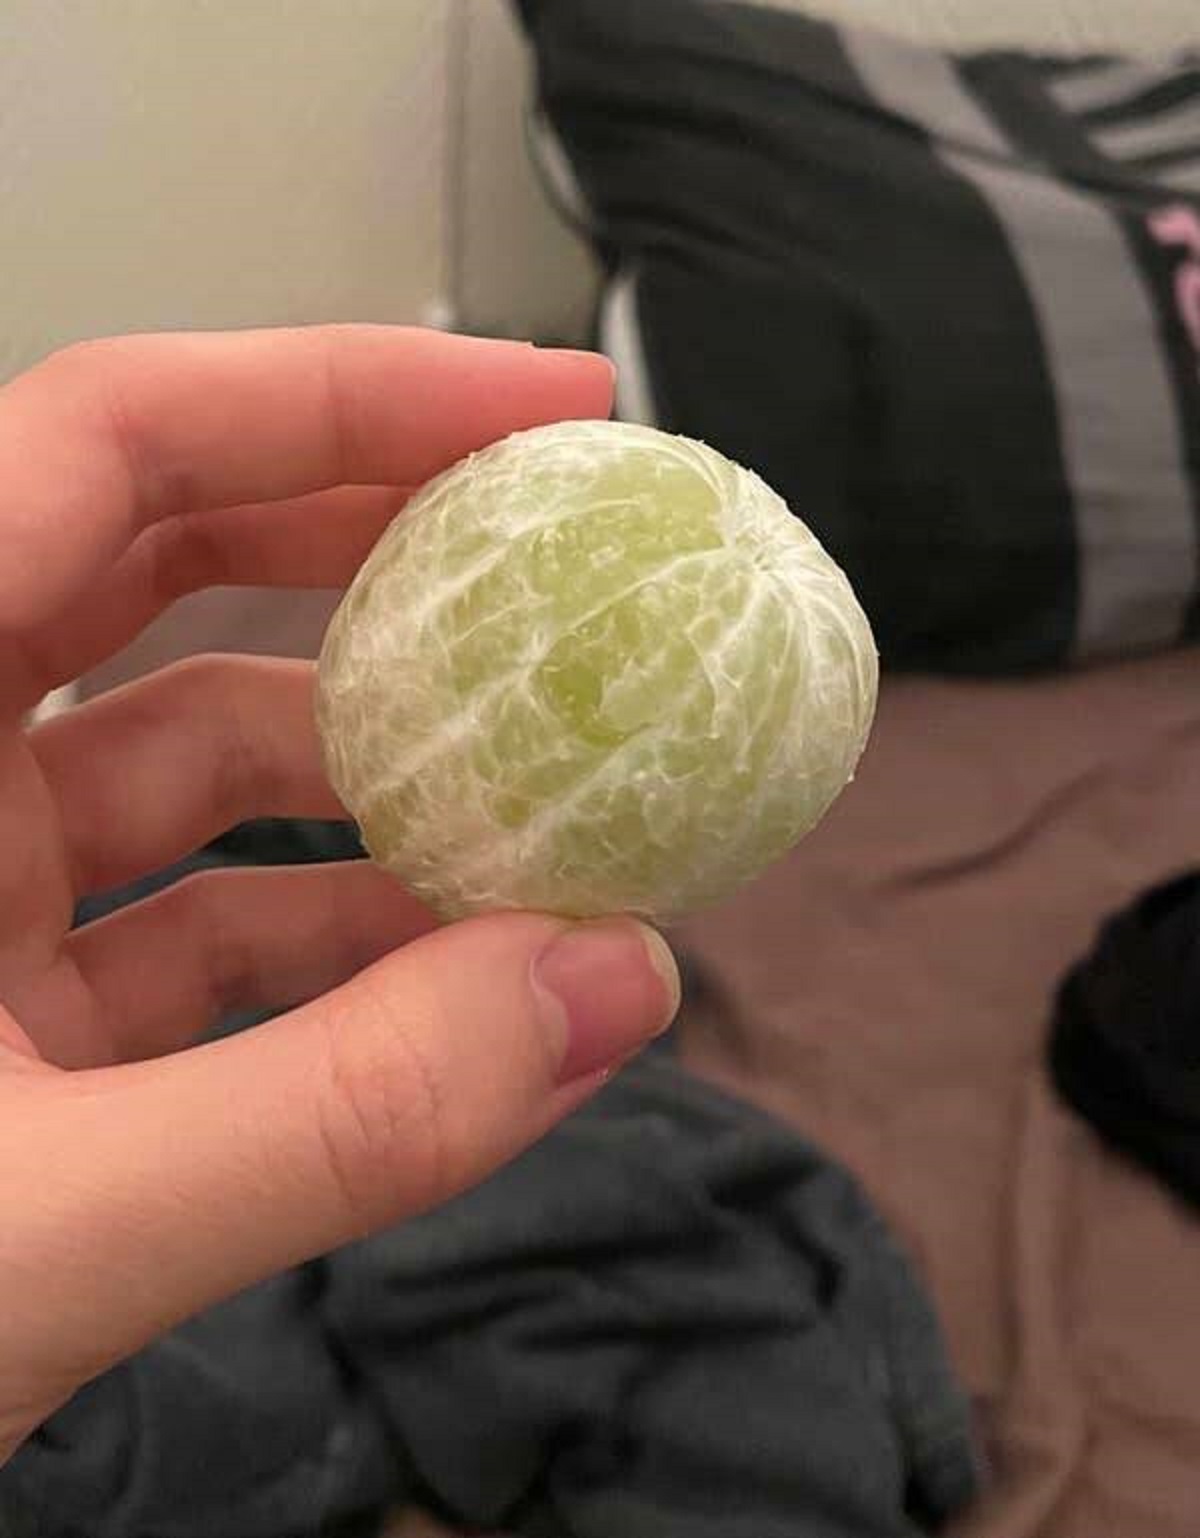 This is what a peeled lime looks like: